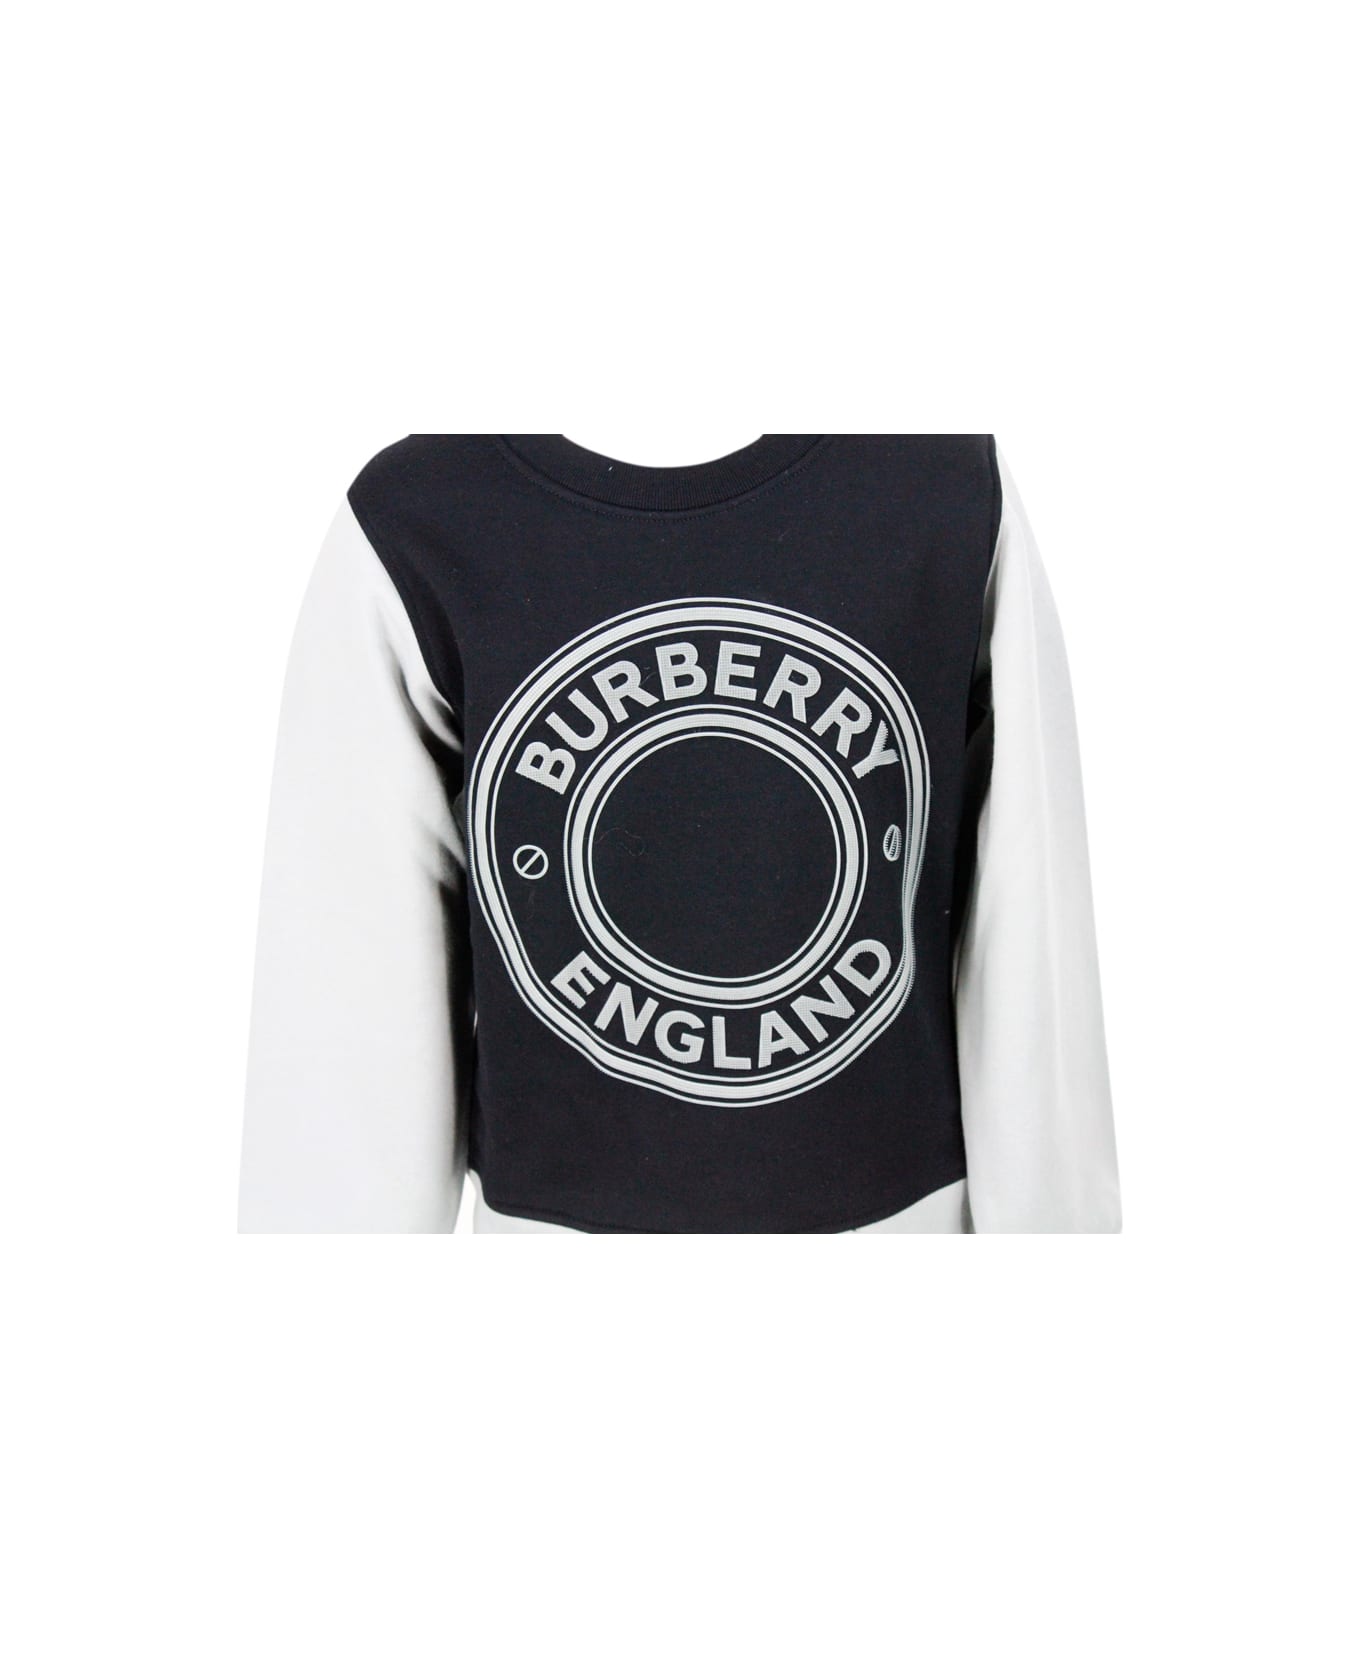 Burberry large Cotton Crewneck Sweatshirt With Central Rubberized Logo In Relief With Sleeves And Bottom In Contrasting Colour - Black